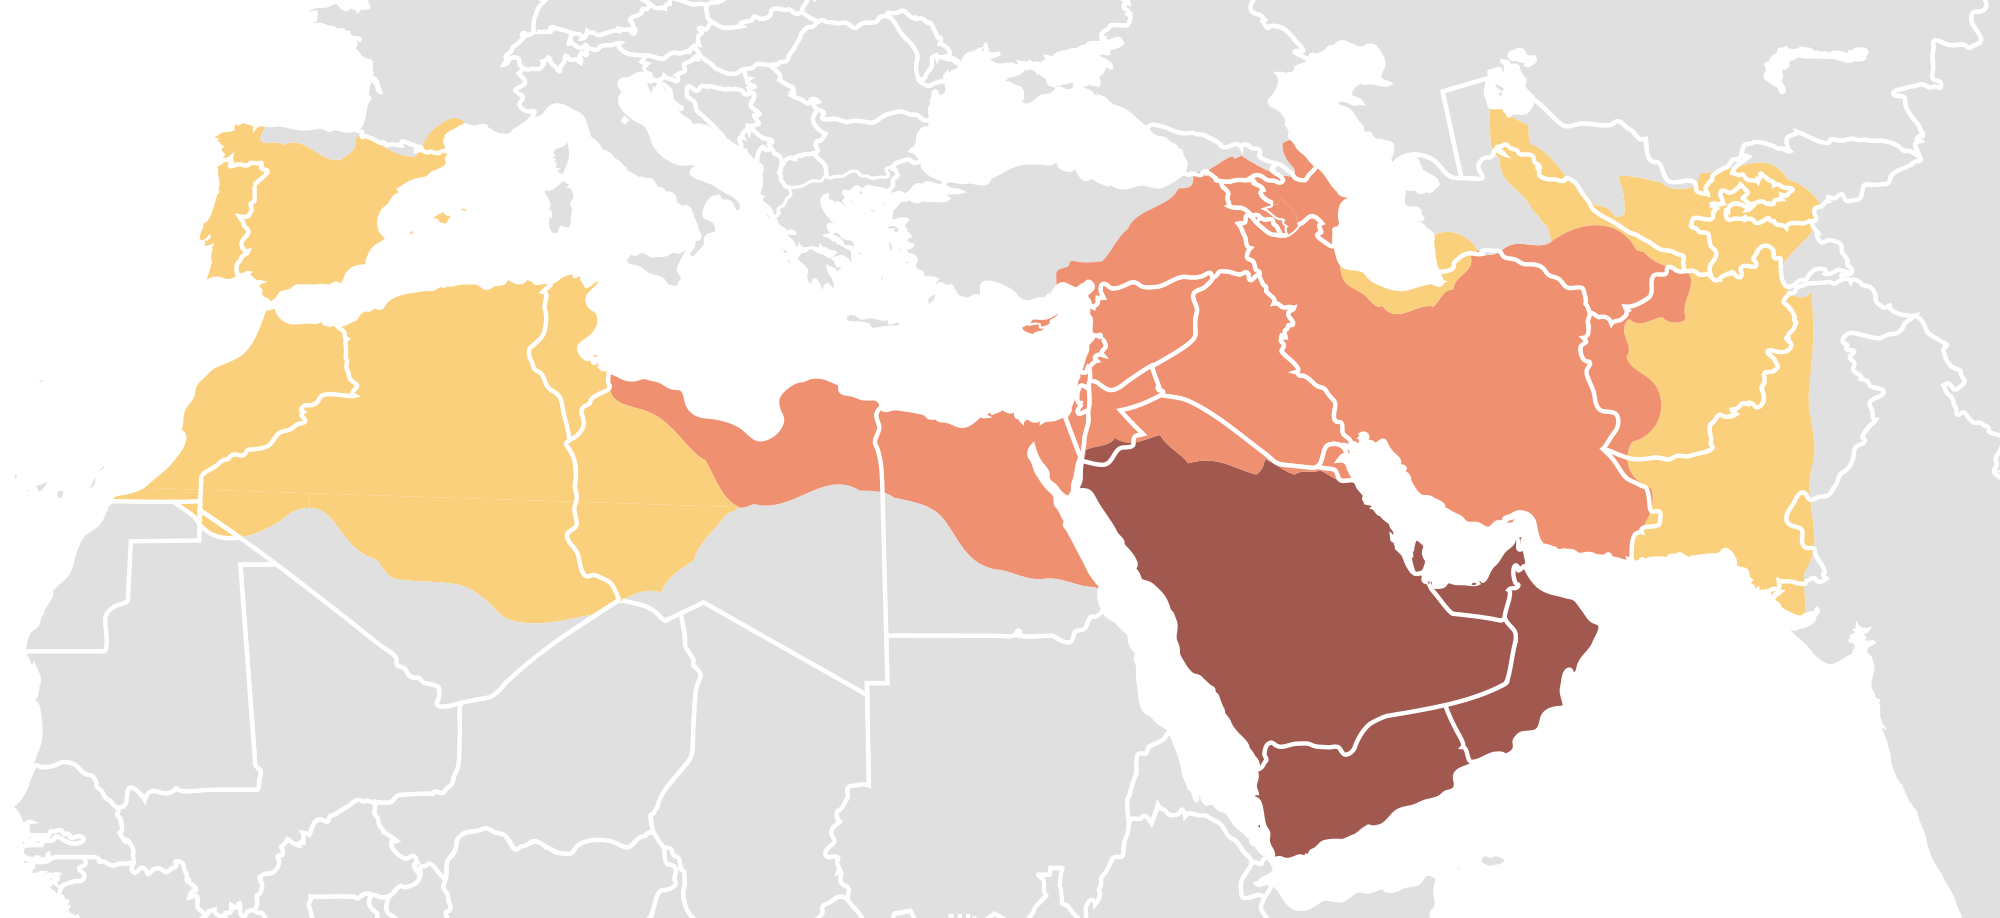 Middle East Asia